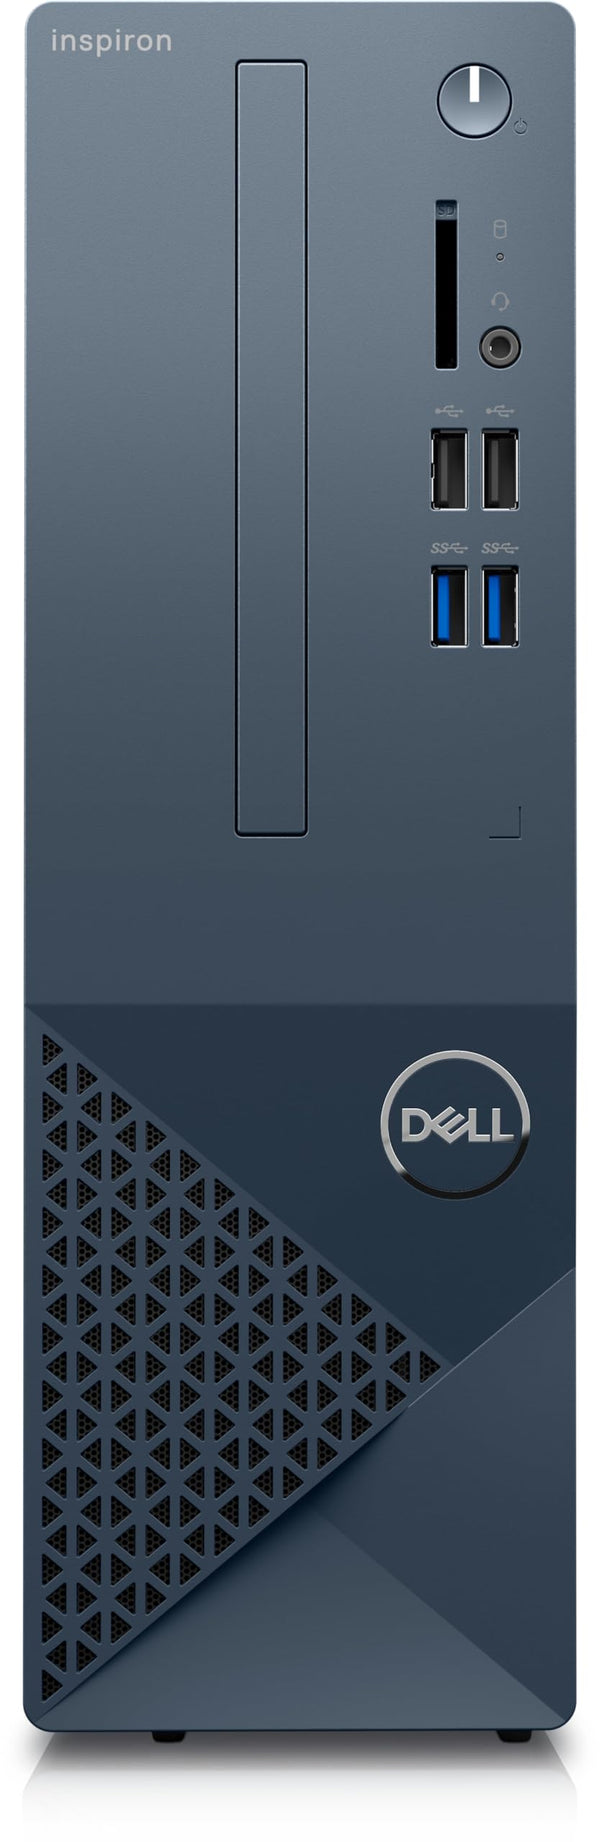 Dell Inspiron 3020 Small Desktop Computer - 13th Gen Intel Core i9-13900 24-Core up to 5.60 GHz CPU, 8GB DDR4 RAM, 256GB NVMe SSD + 20TB HDD, Intel UHD Graphics 770, Keyboard & Mouse, Windows 11 Pro - PEGASUSS 